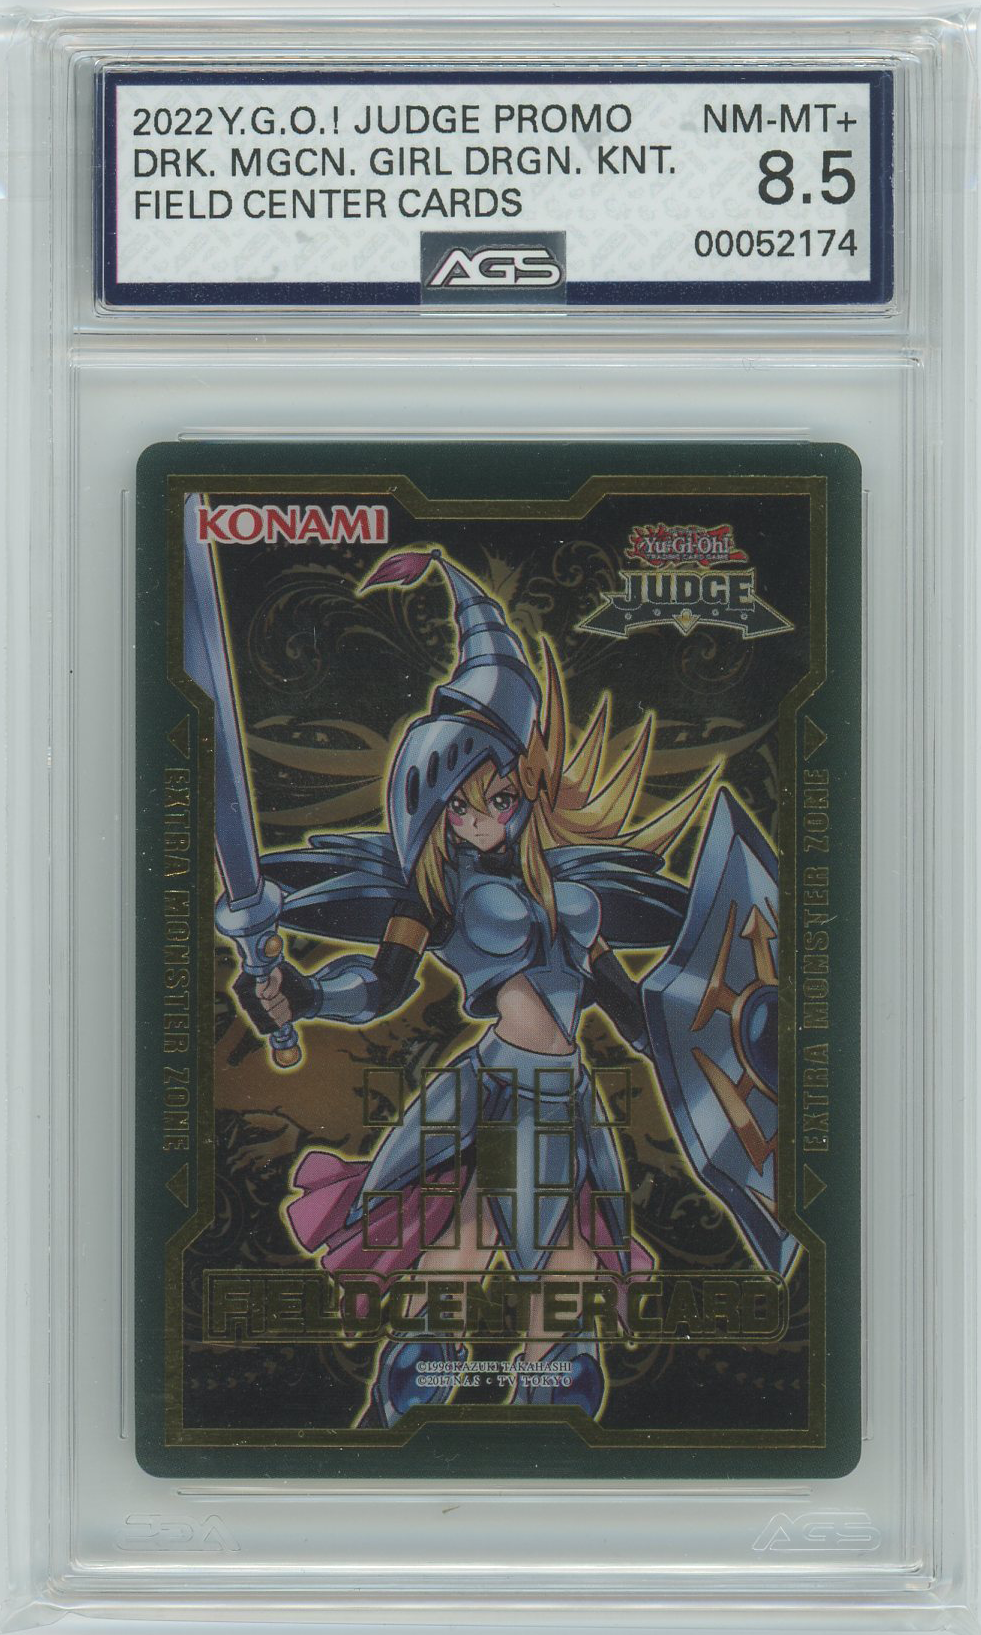 AGS (NM-MT+ 8.5) Dark Magician Girl the Dragon Knight #P001 - Field Center Cards (#00052174)